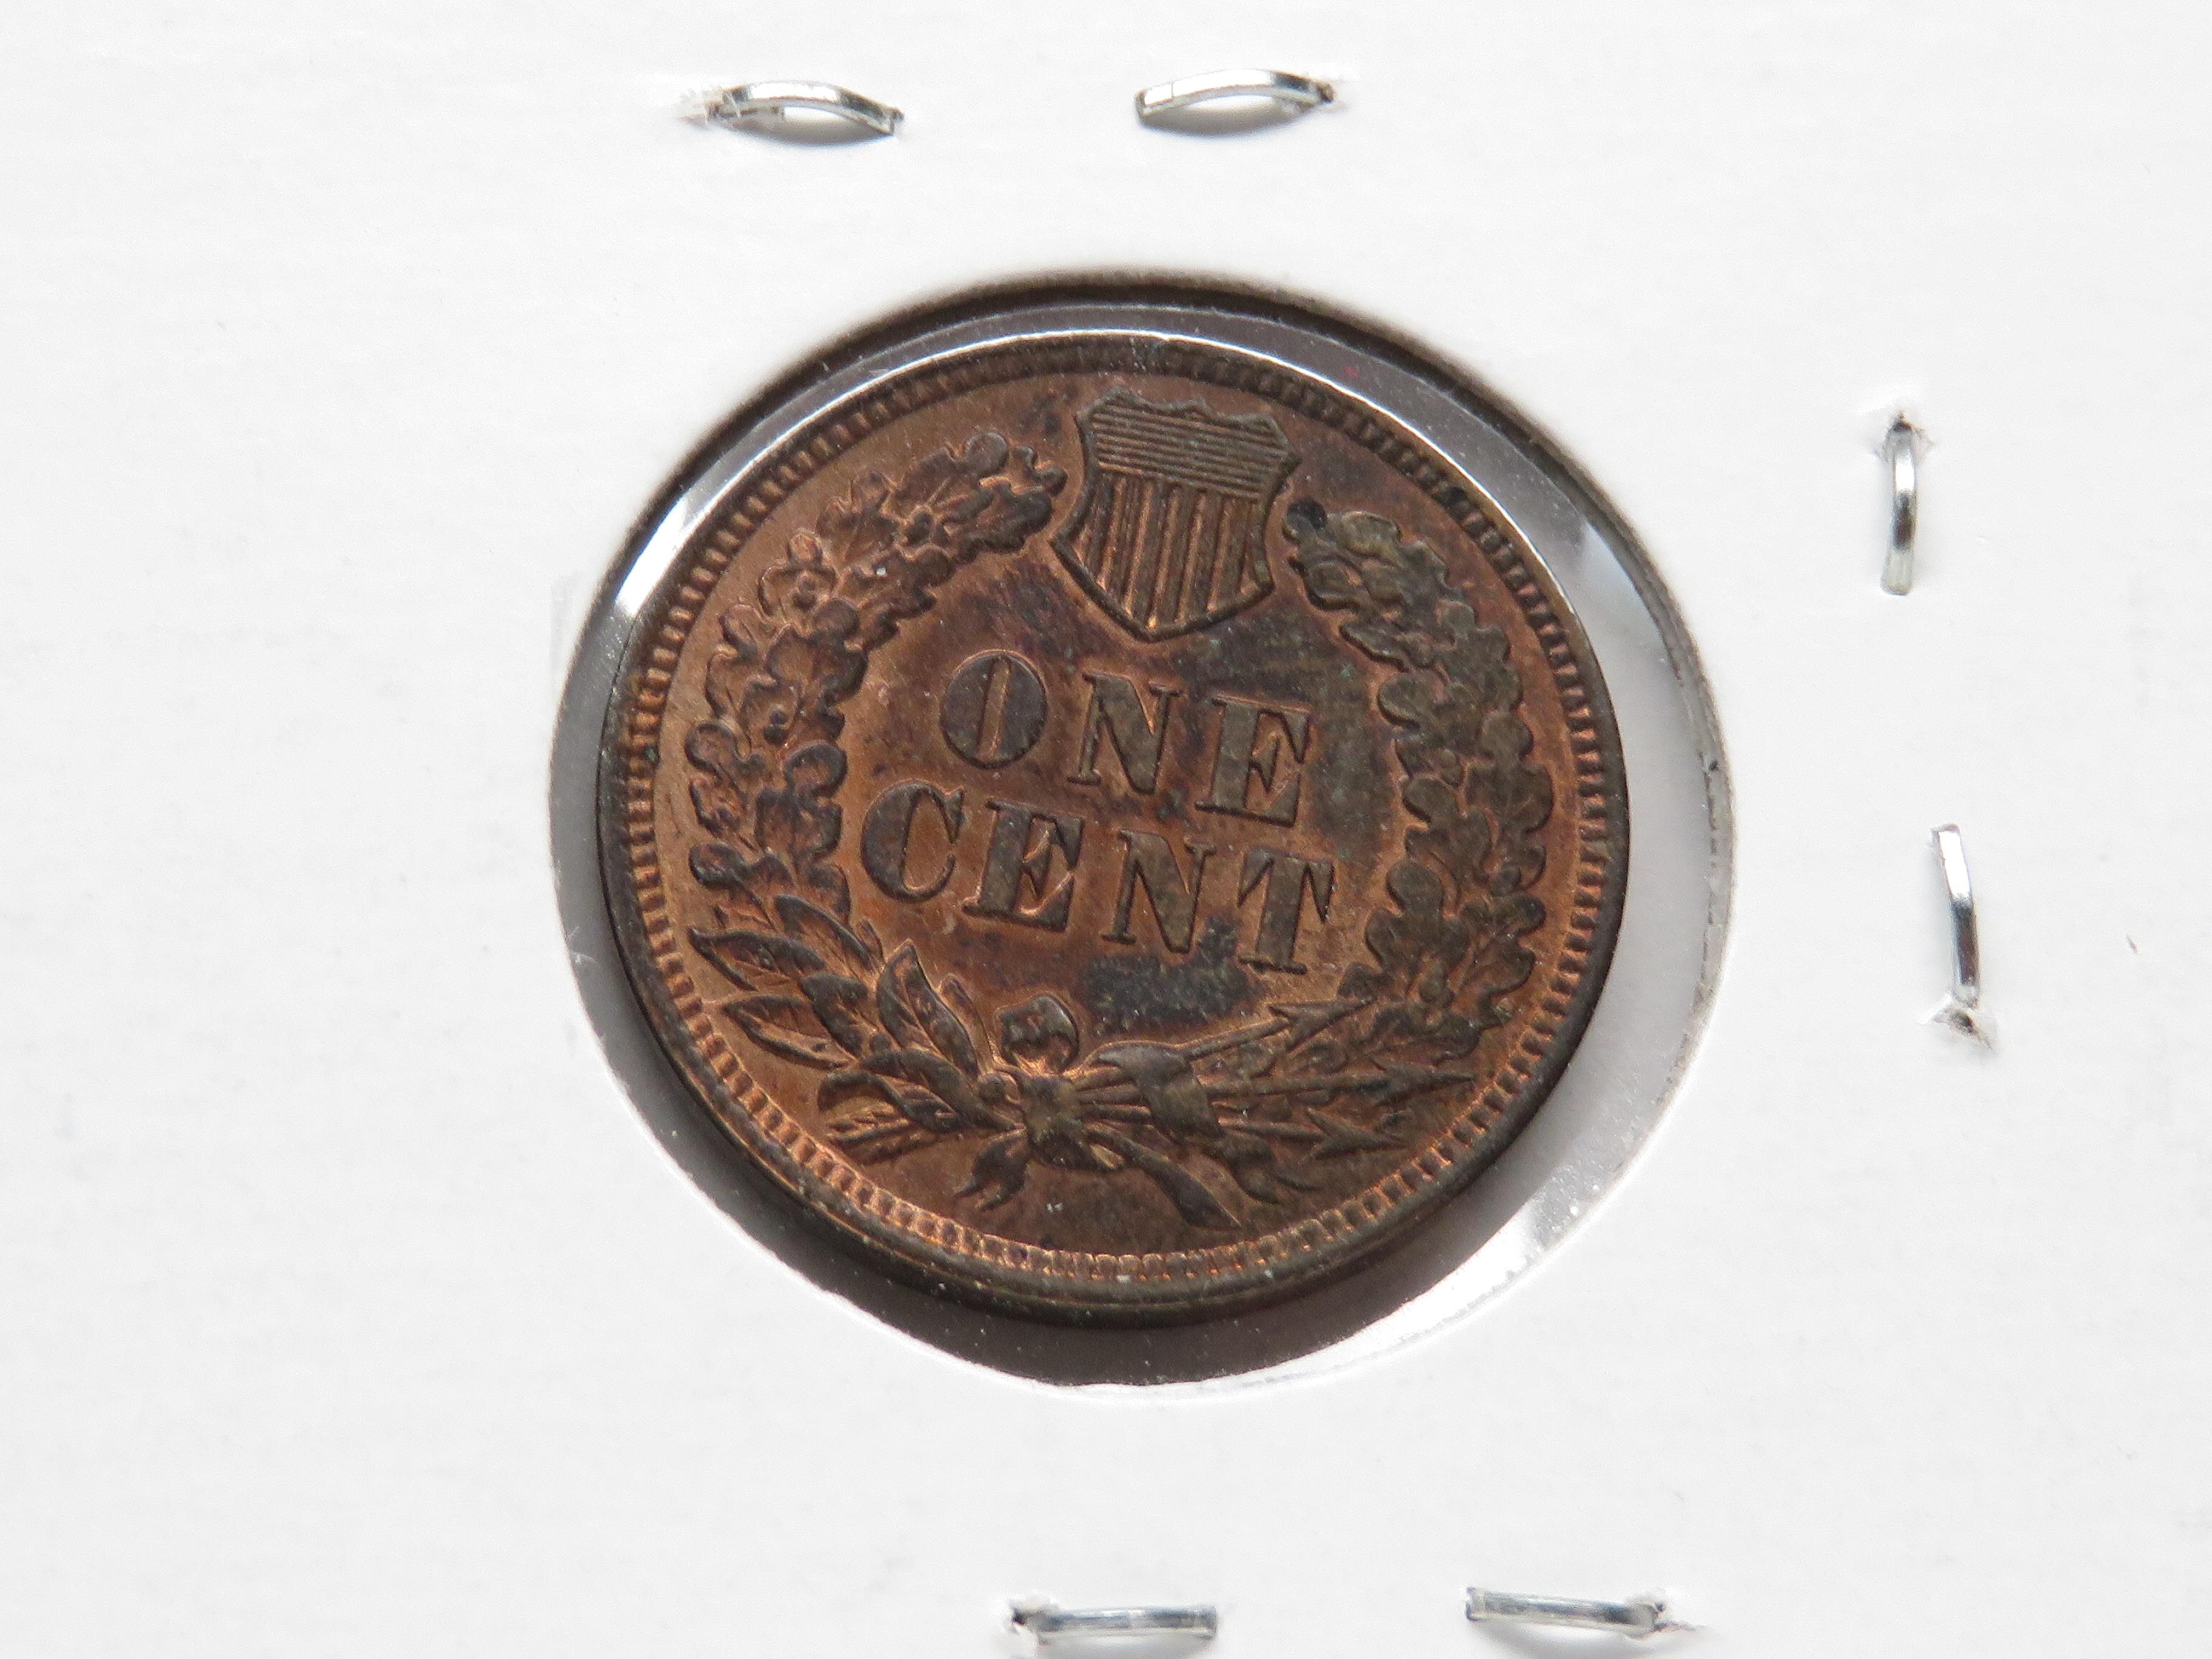 2 CH BU Indian Cents: 1897, 1899 toning